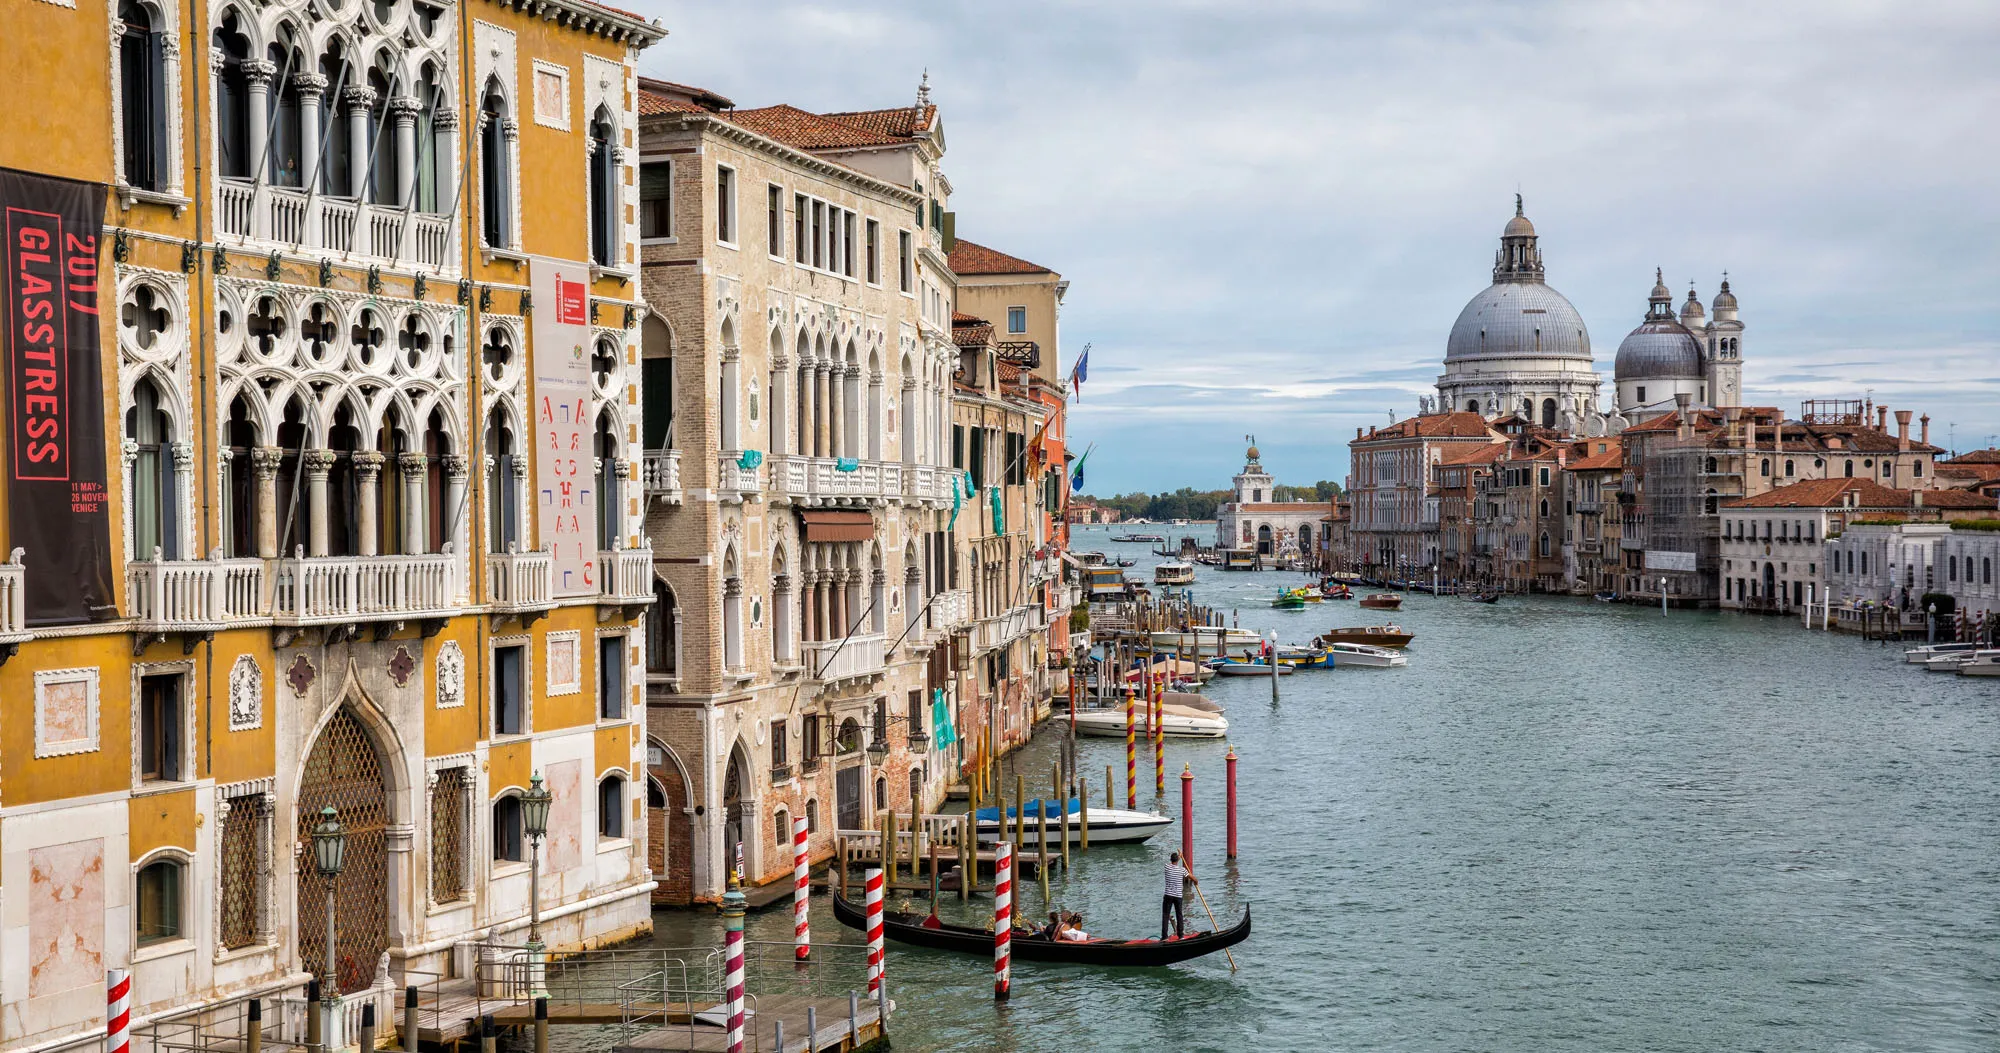 Featured image for “20 Photos That Will Make You Want to Visit Venice Italy”